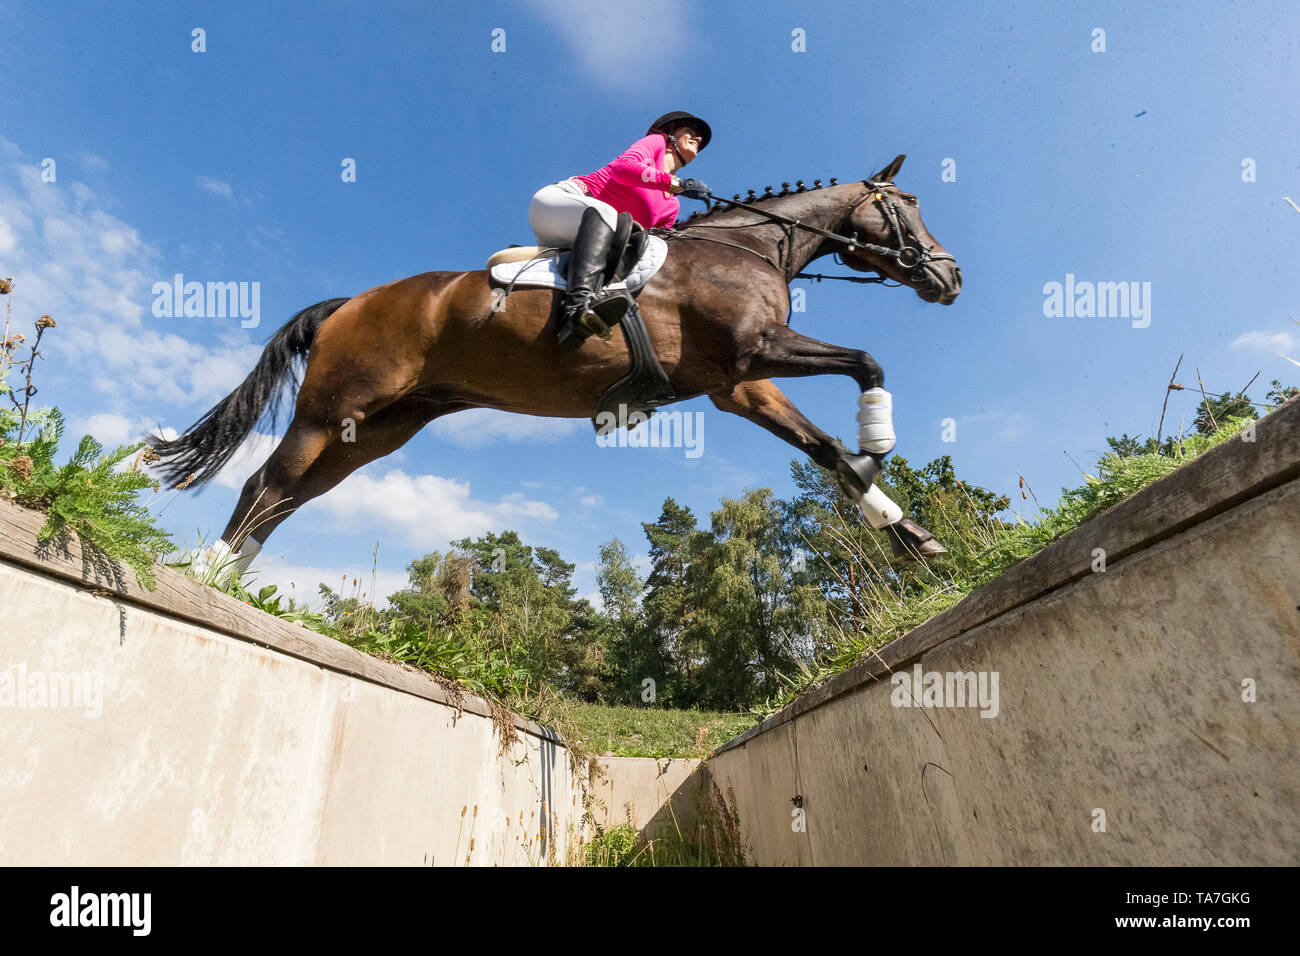 German Riding Pony. Rider on bay gelding clearing an obstacle during a cross-country ride. Germany Stock Photo